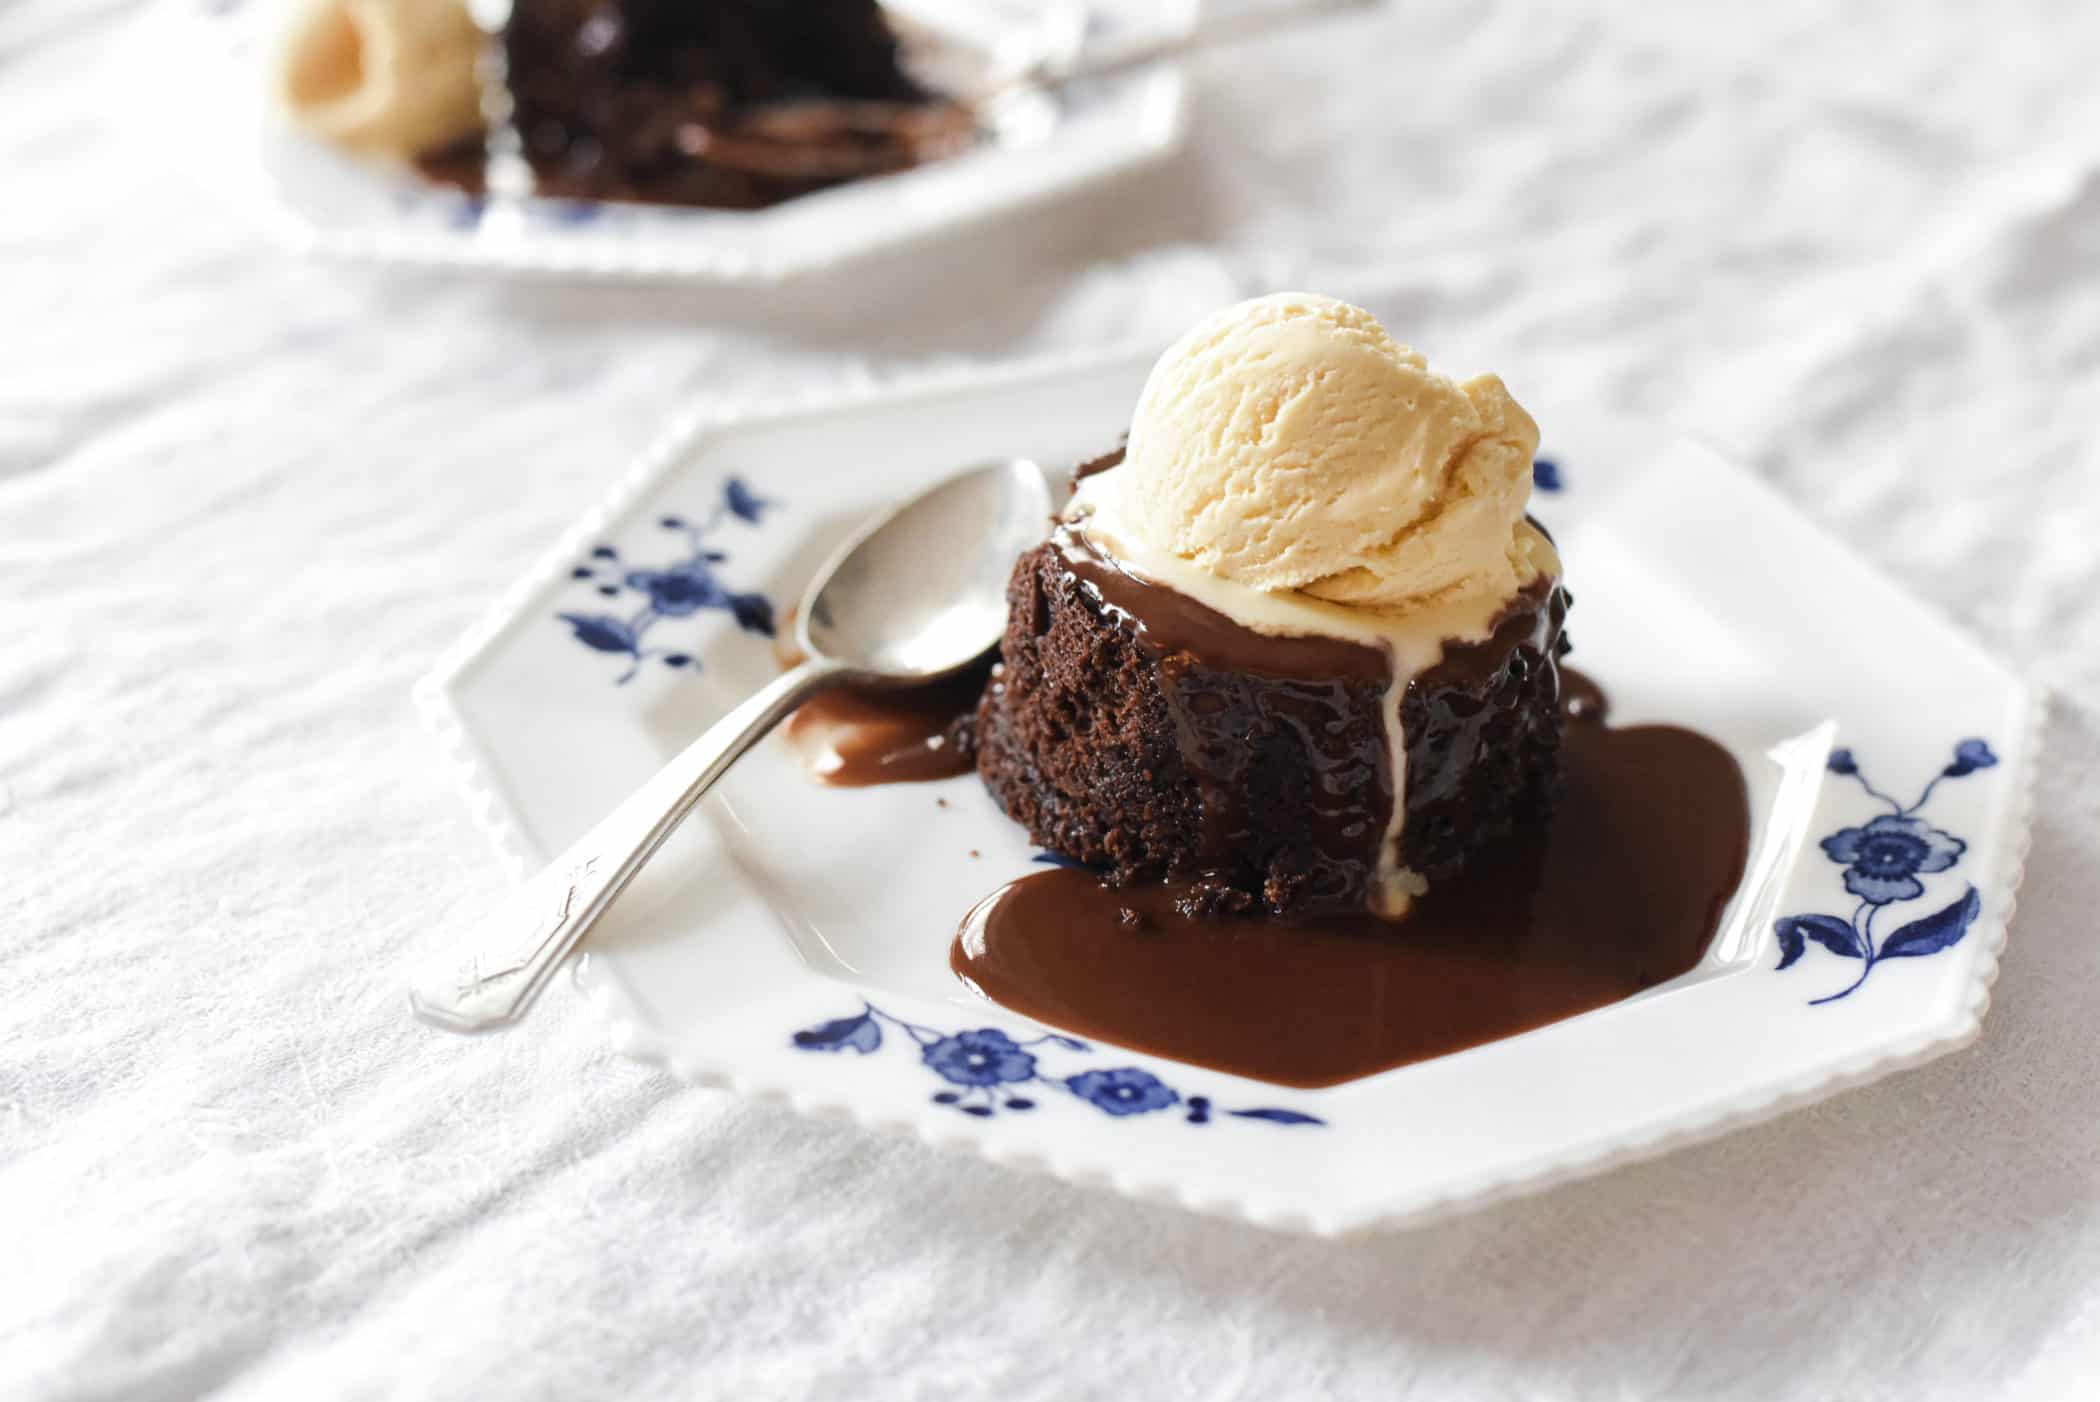 Вкус пудинга. Sticky Toffee Pudding. Sticky Toffee Pudding рисунок. Ice Cream Chocolate with Stick.